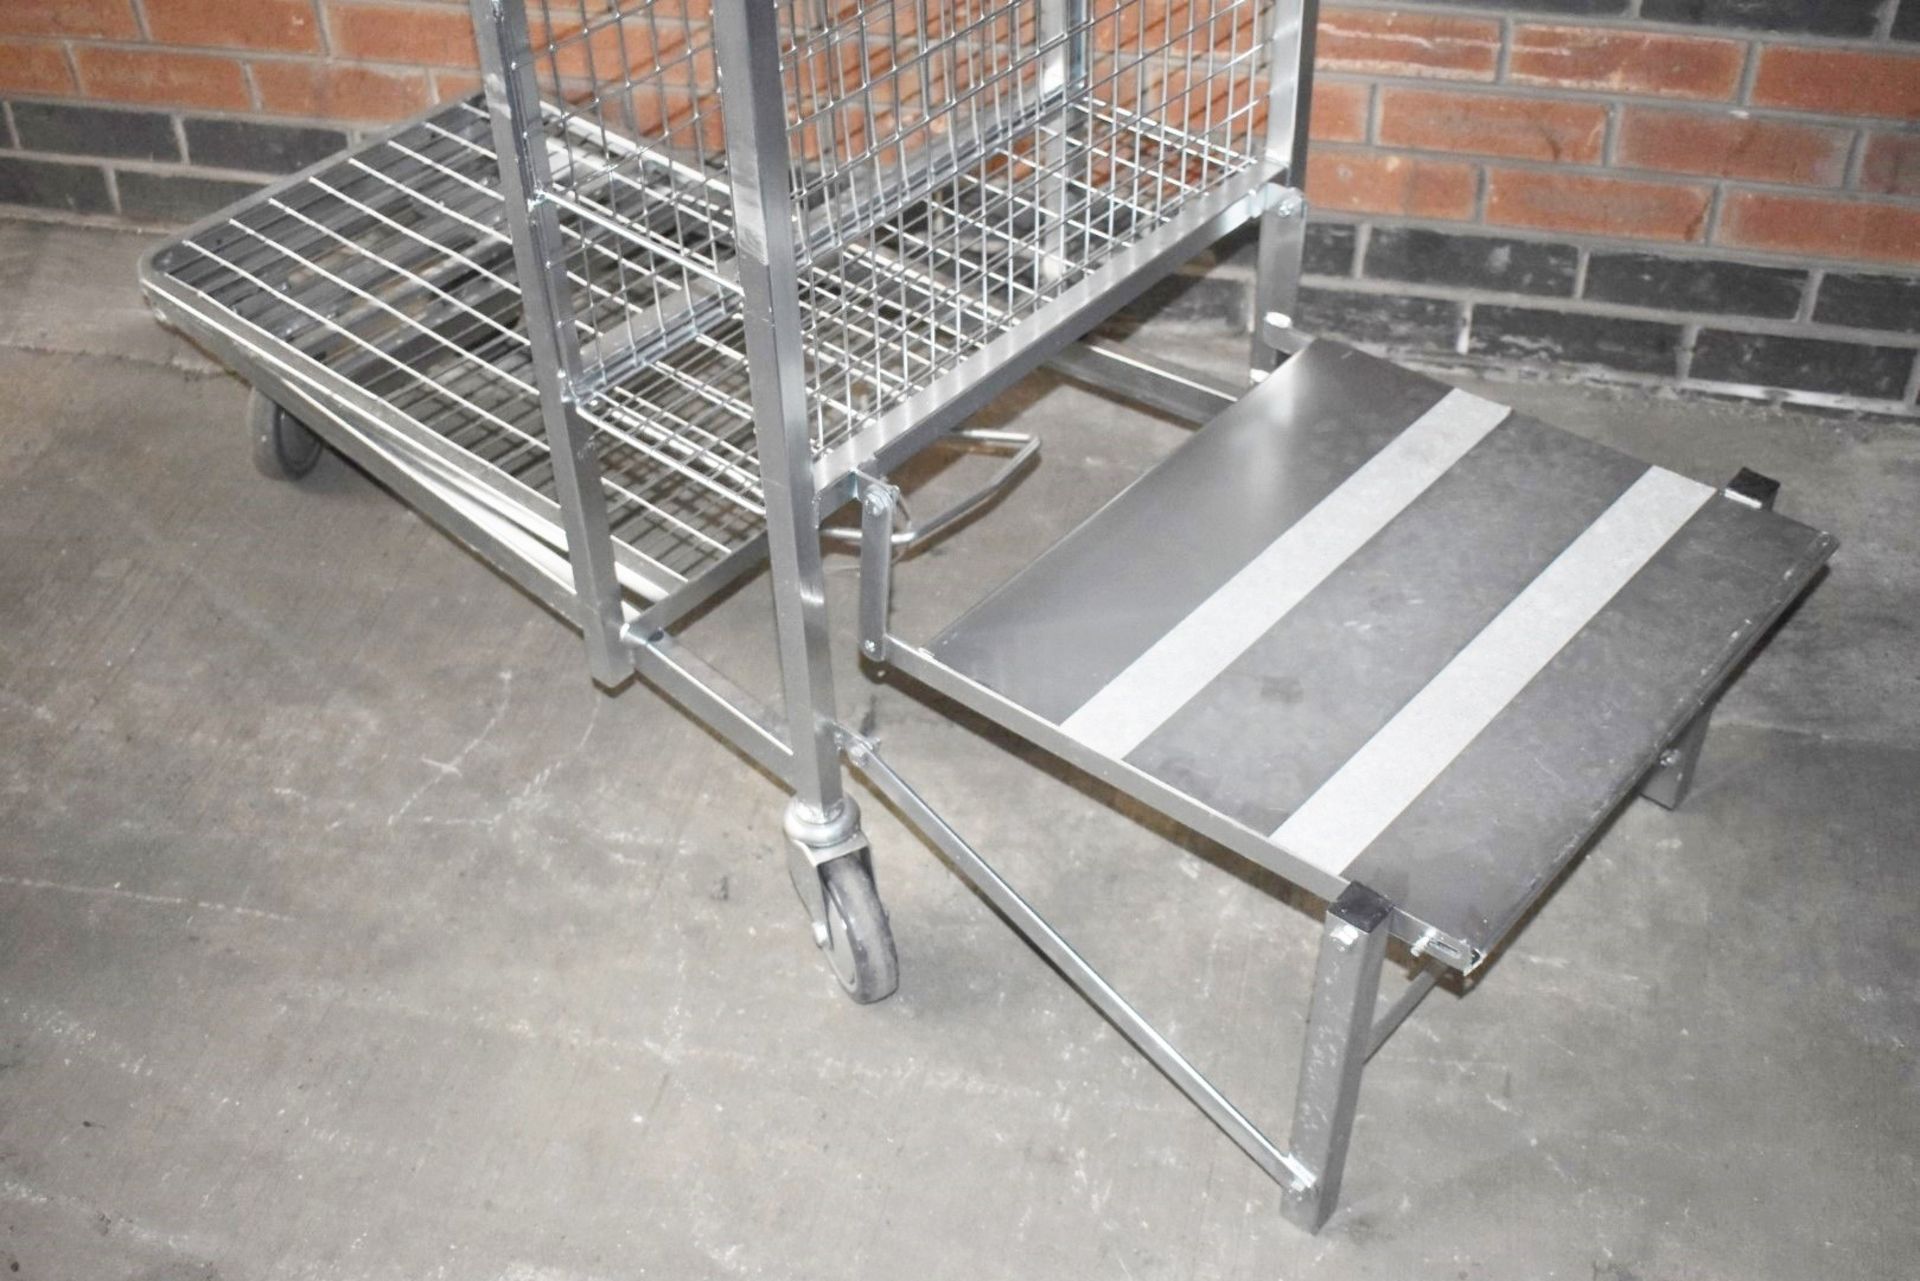 1 x Supermarket Retail Merchandising Trolley With Pull Out Step and Folding Shelf - Dimensions: - Image 8 of 9